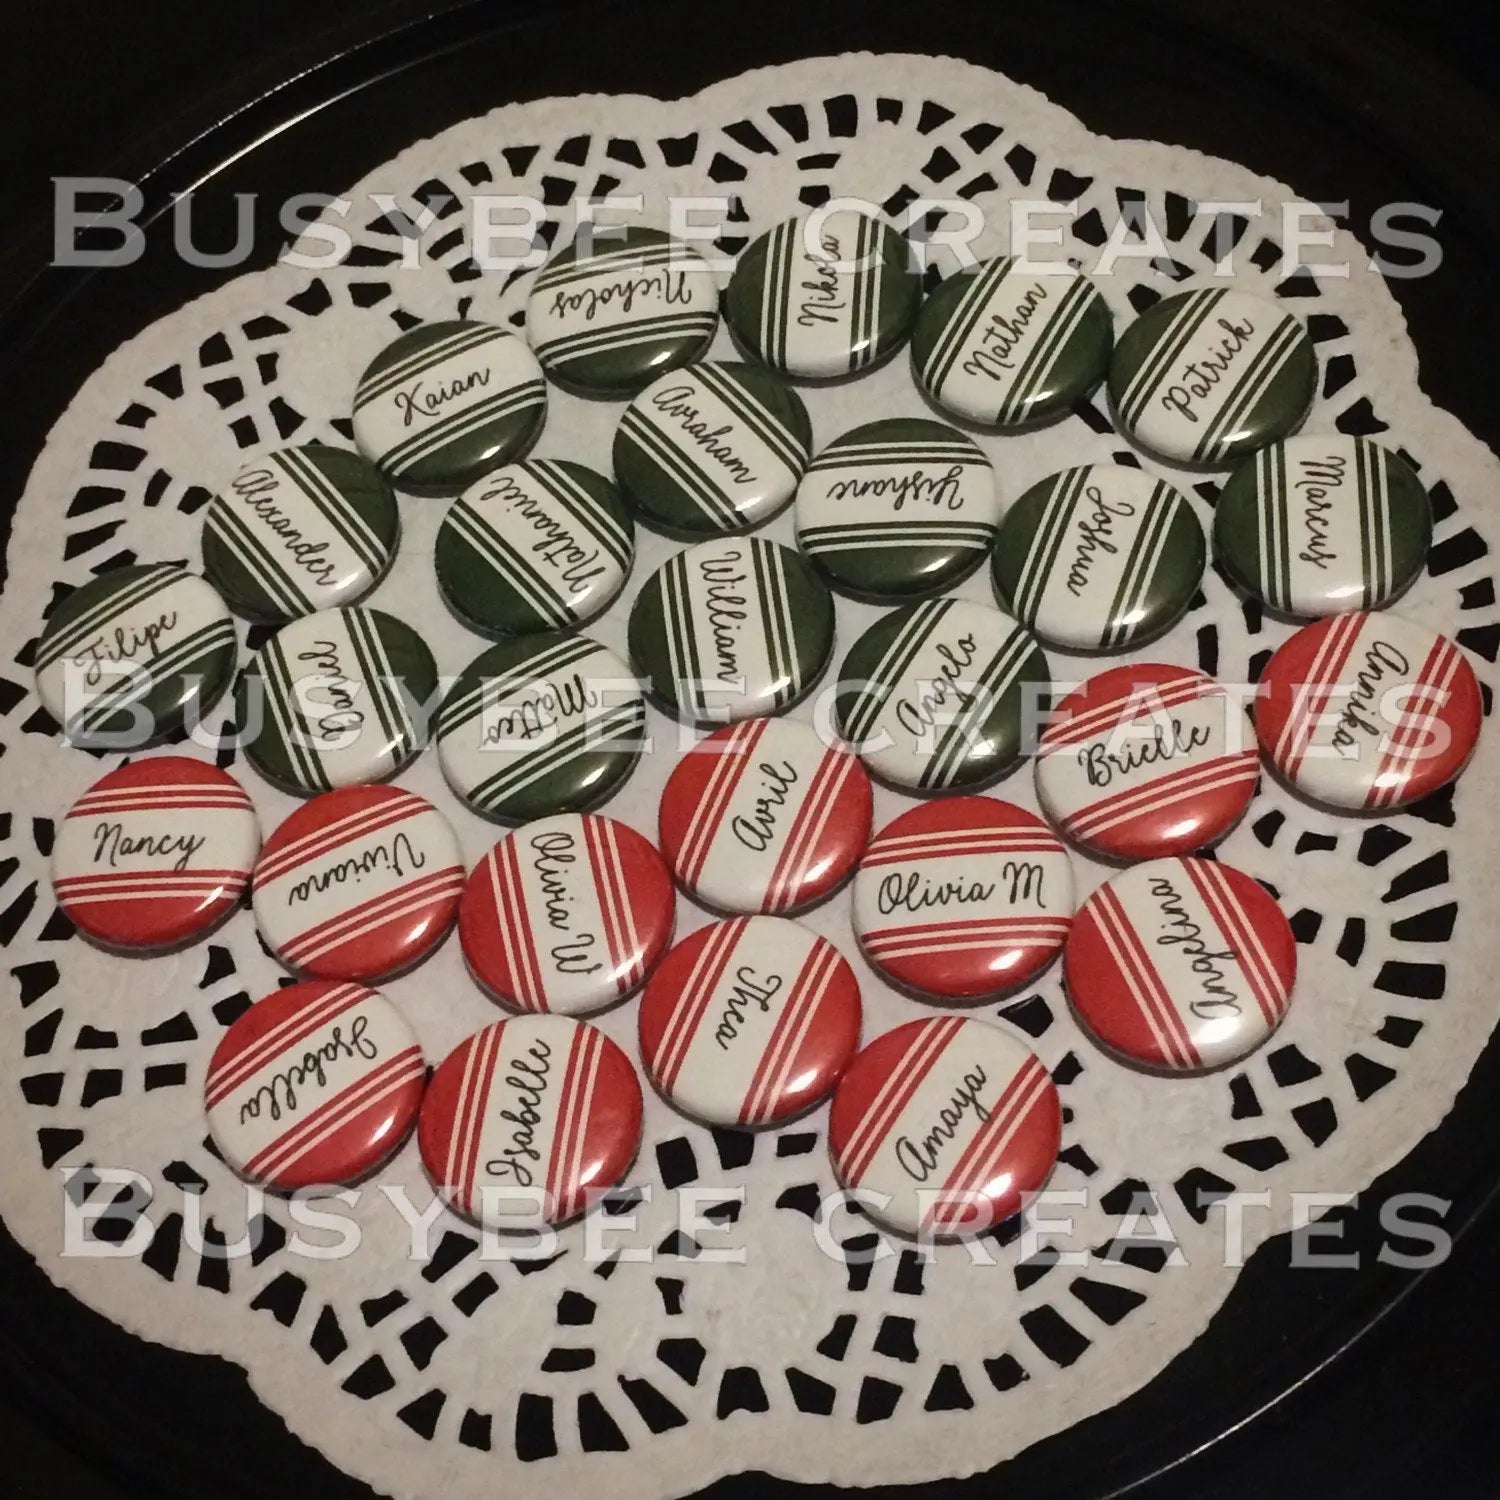 Personalized Woodland Theme Seating Chart Button Pins -  25 pieces busybeecreates